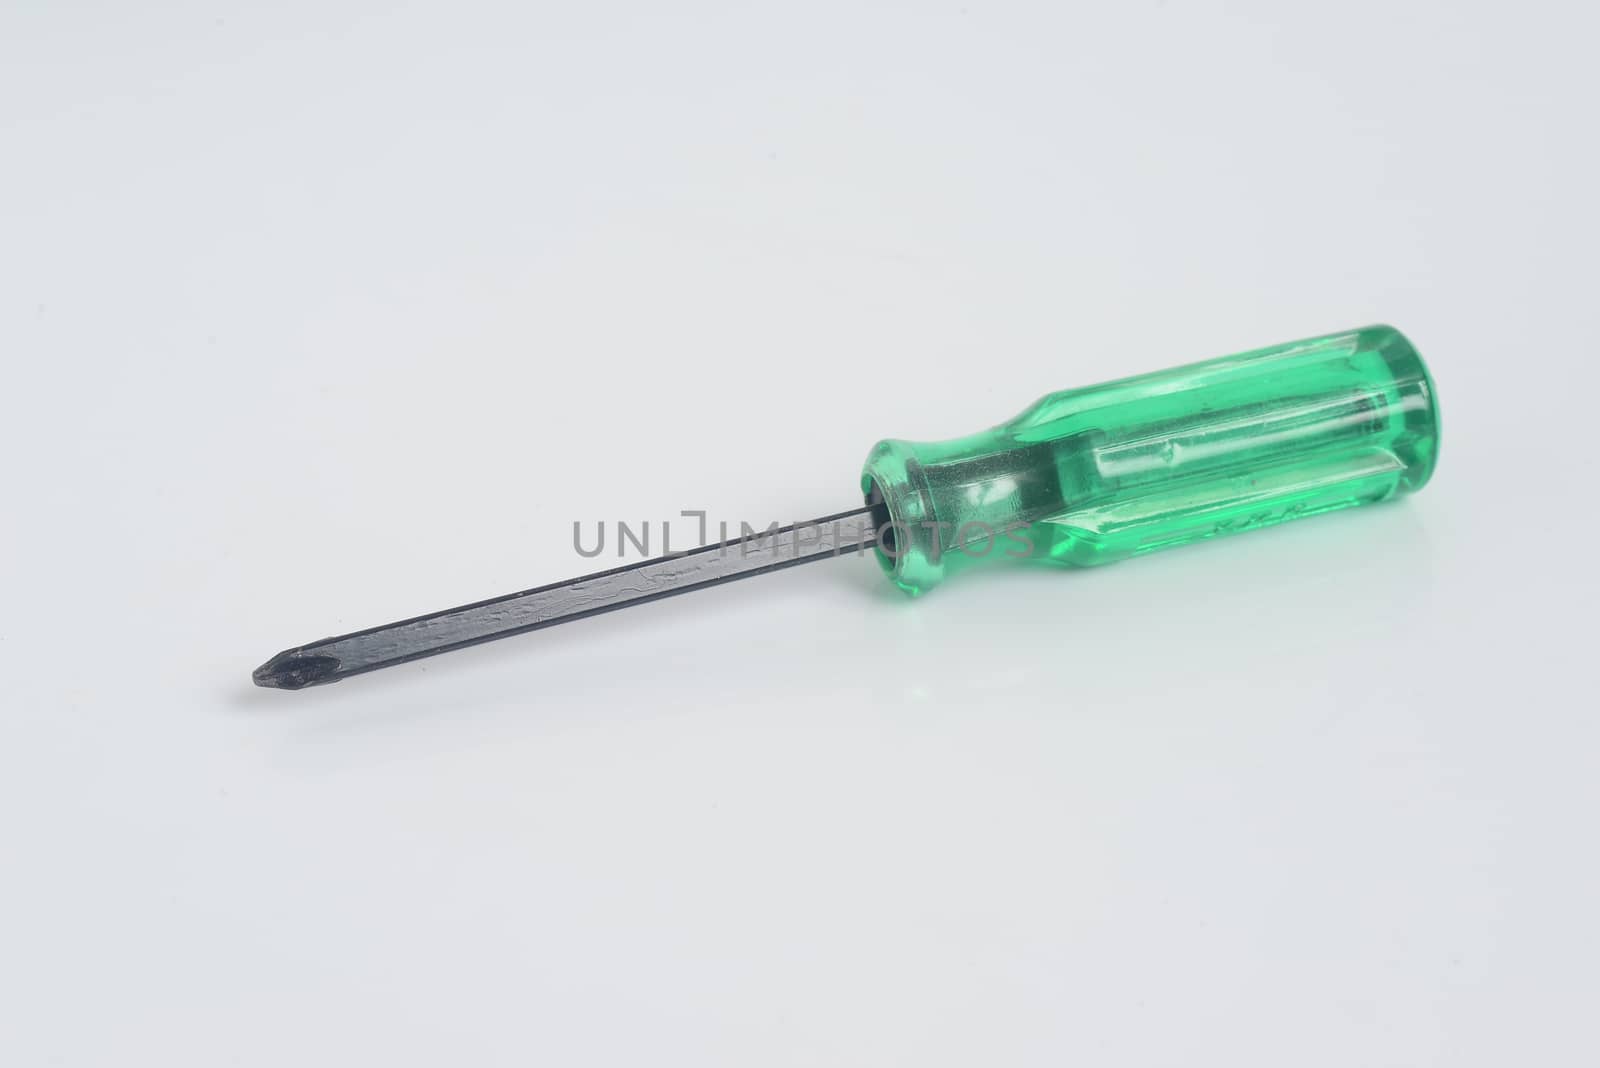 Cross - Reset Head Screwdriver on white background by ideation90